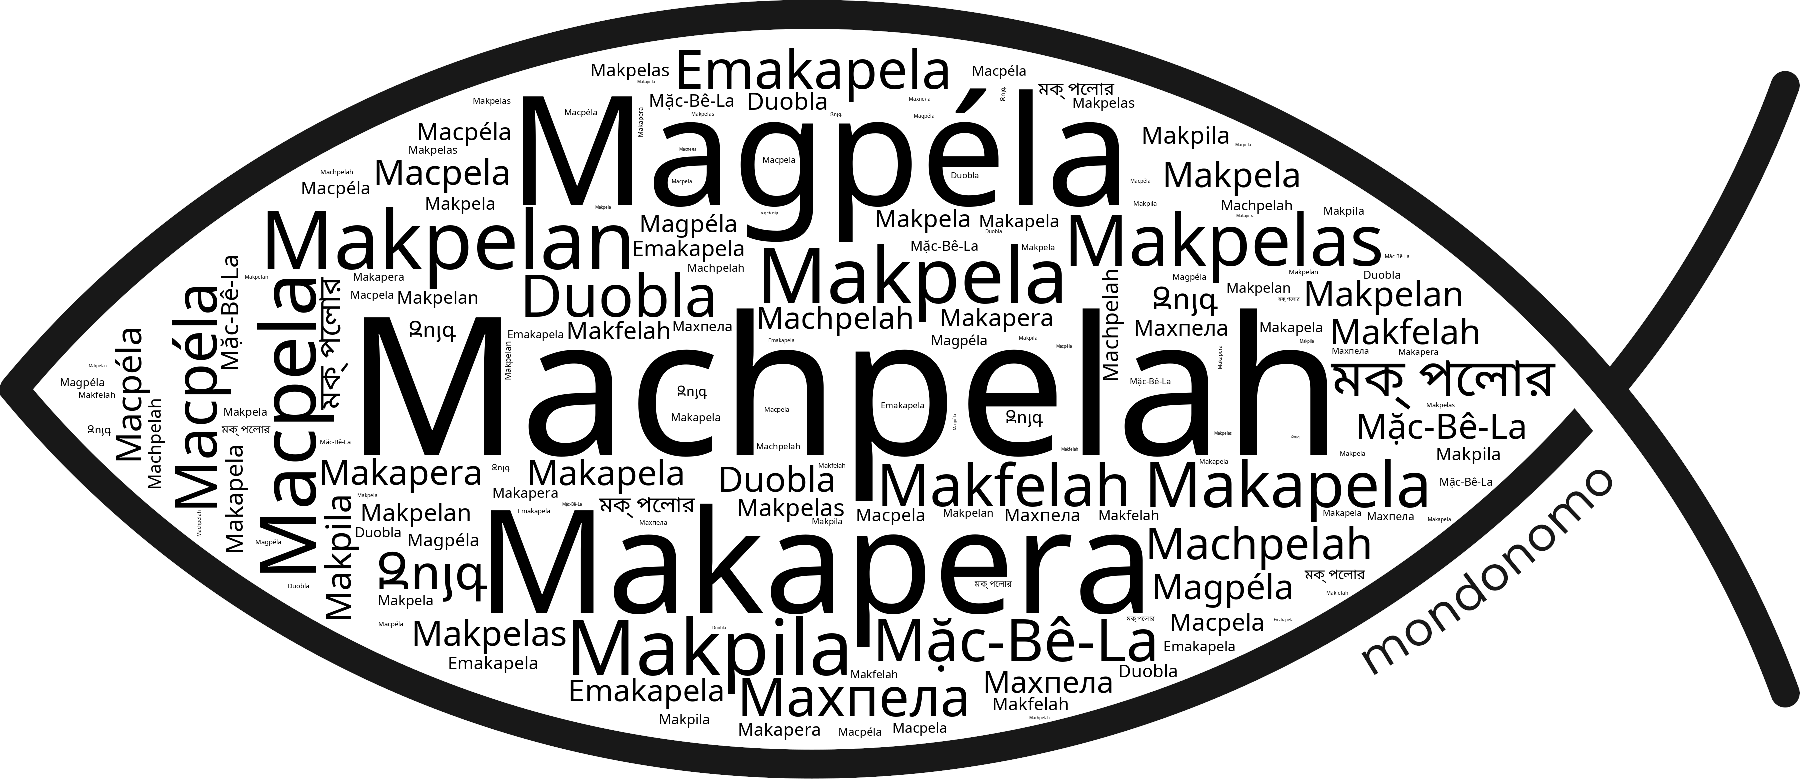 Name Machpelah in the world's Bibles